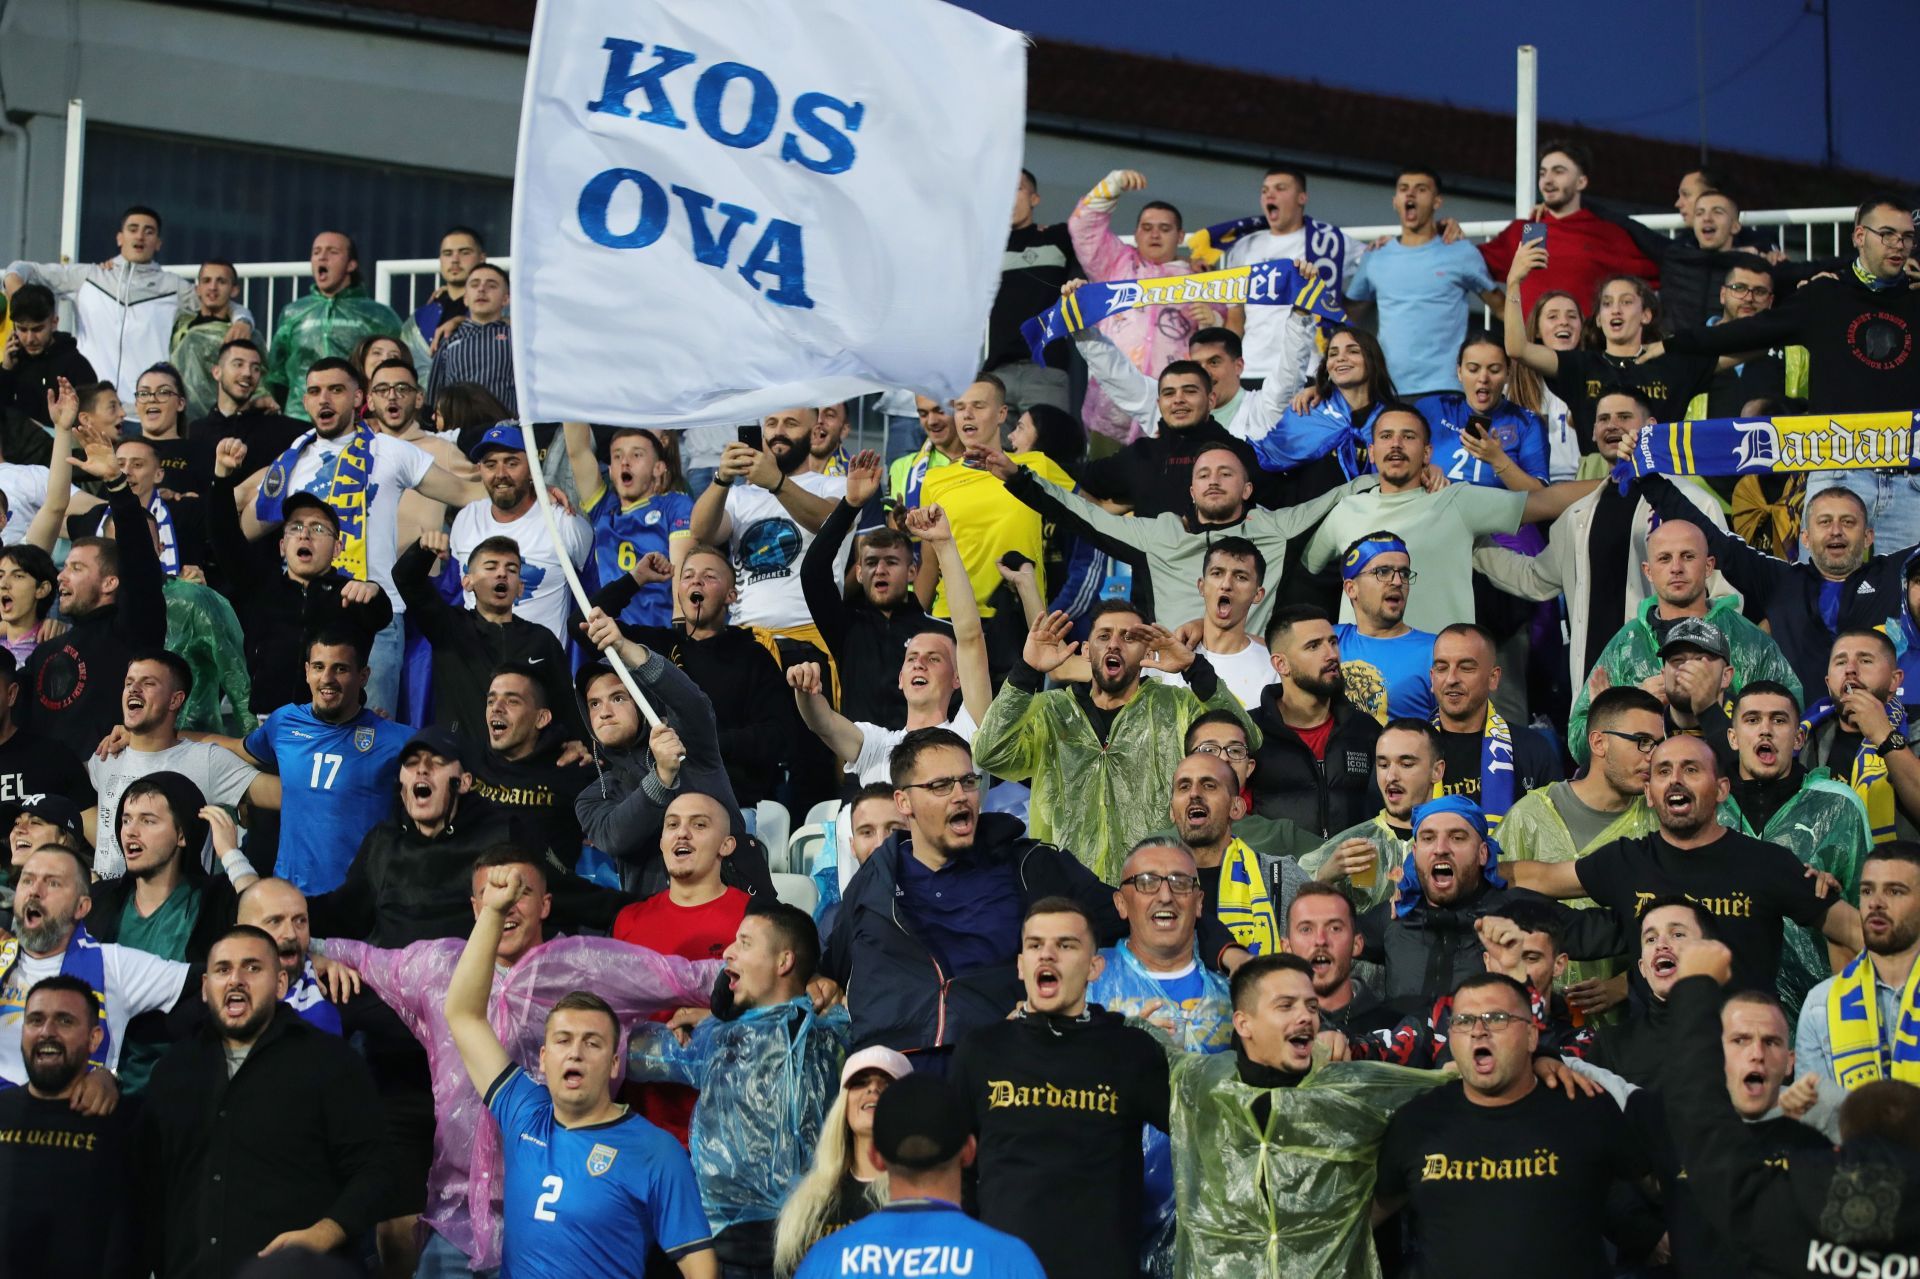 Kosovo football fans supporting their team